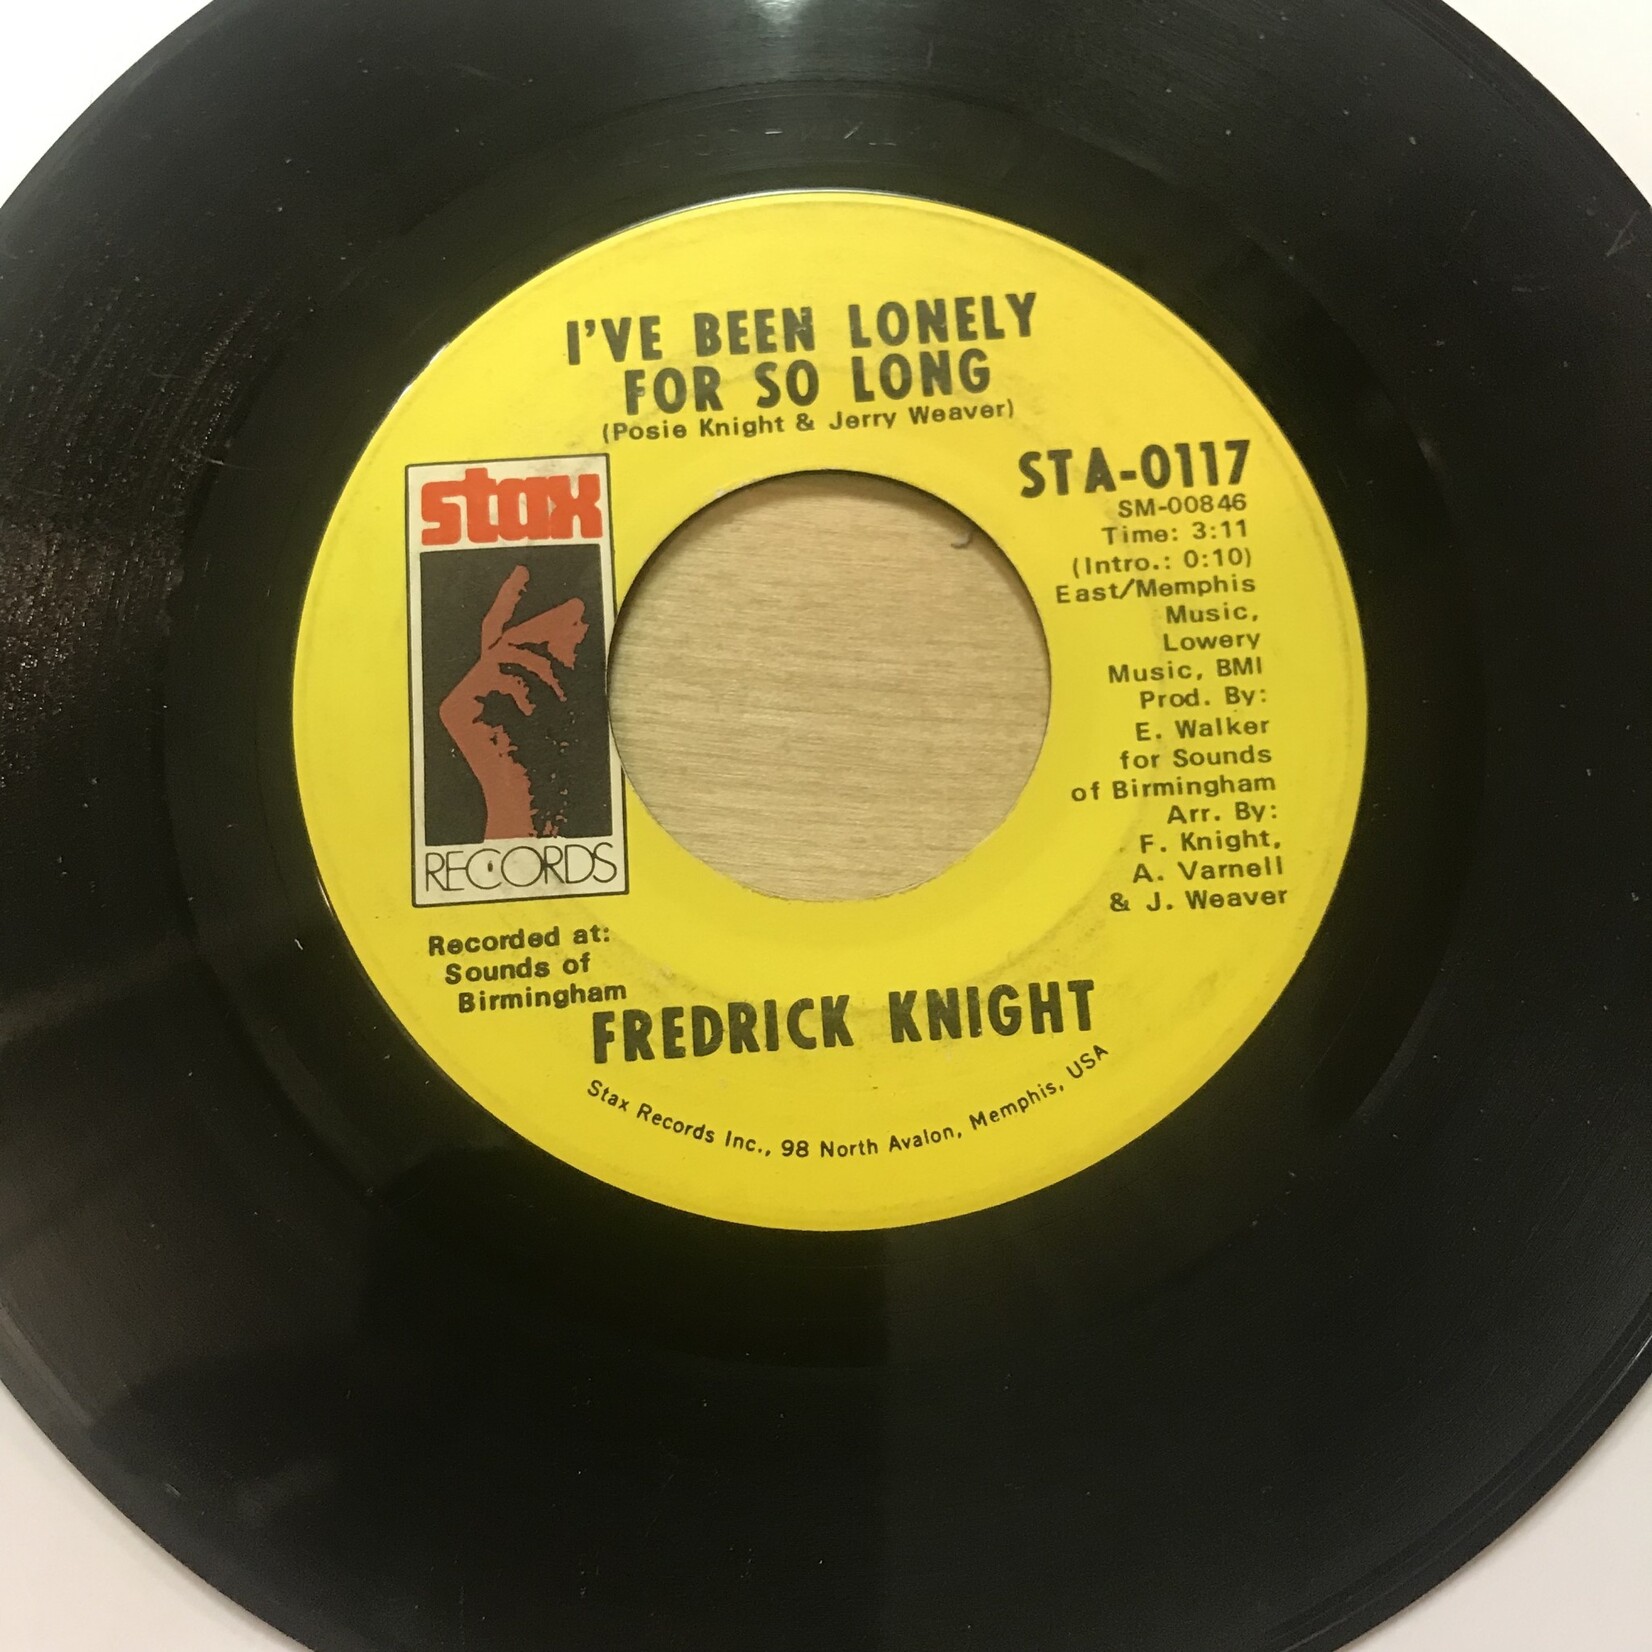 Fredrick Knight - Lean On Me / I’ve Been Lonely For So Long - STA 0117 - Vinyl 45 (USED)